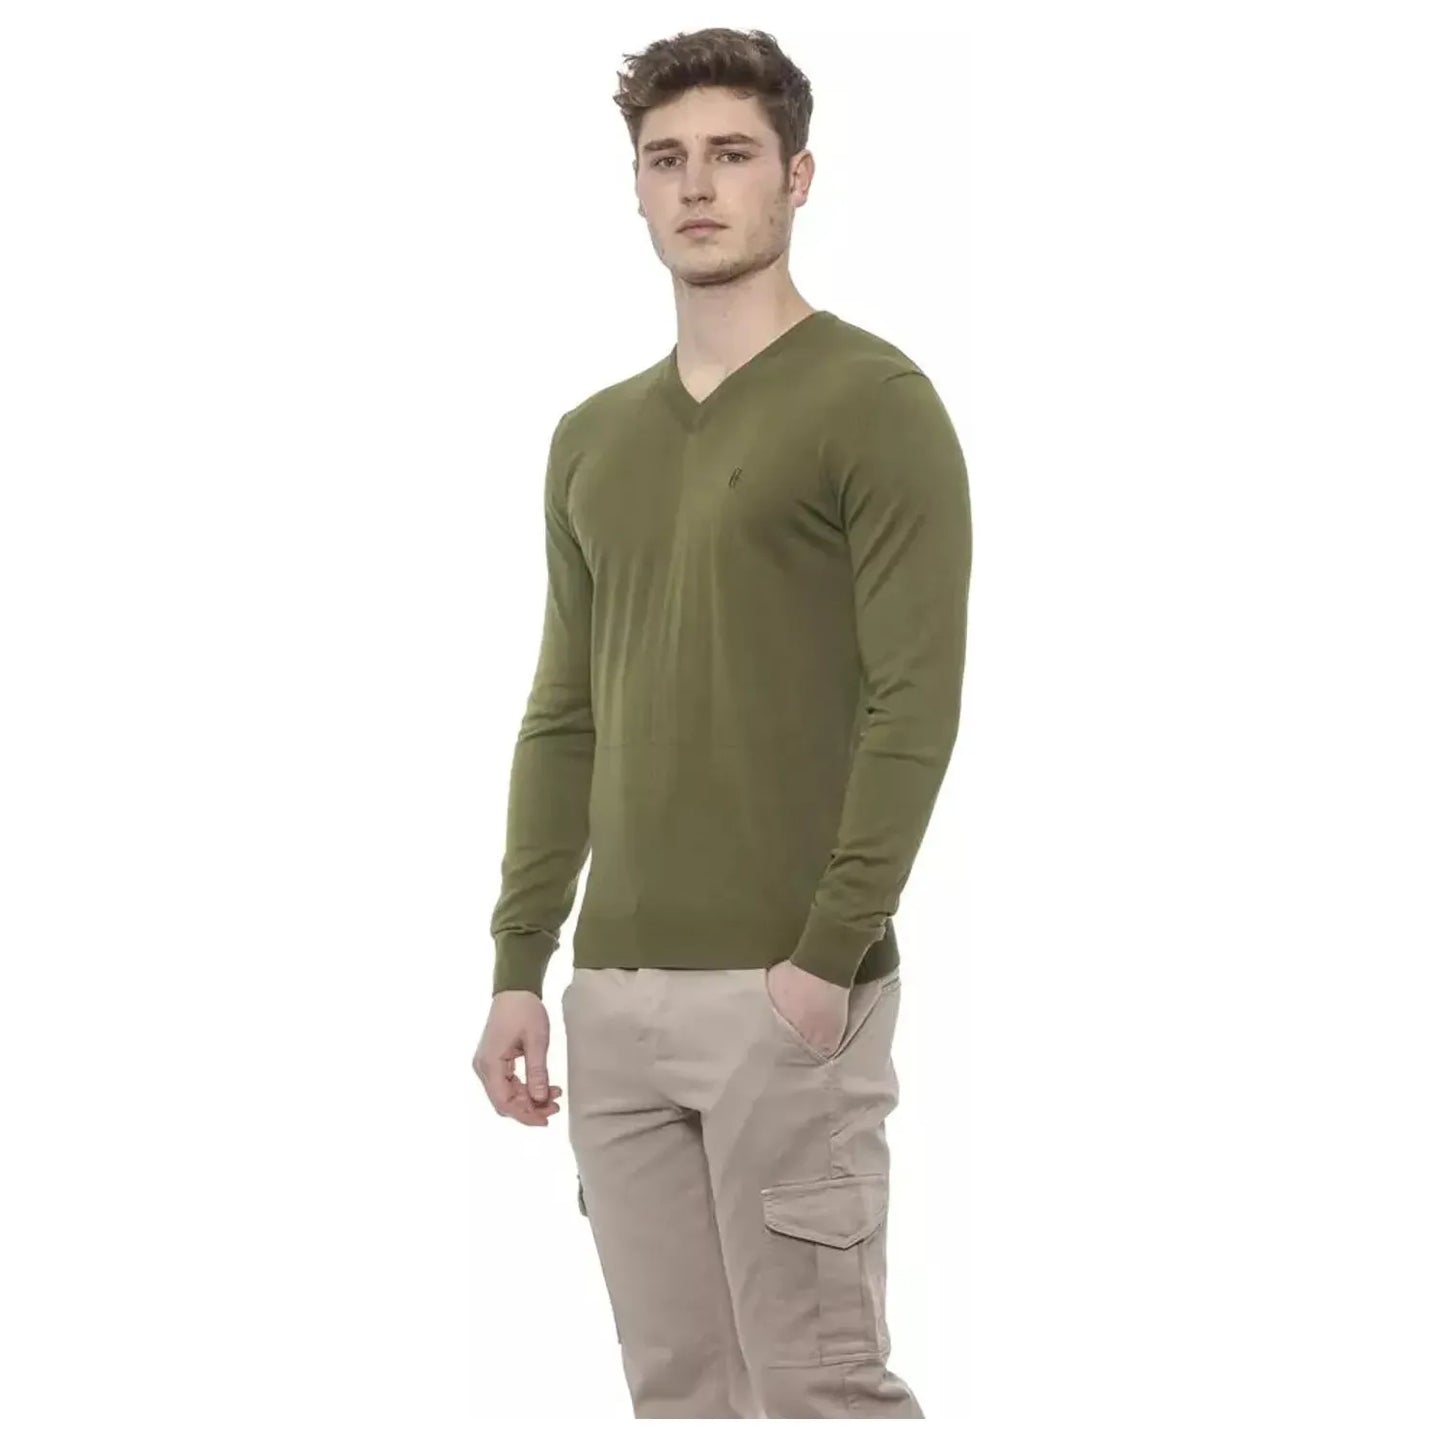 Conte of Florence Elegant V-Neck Green Cotton Sweater olivegreen-sweater stock_product_image_20336_620736967-18-c4a03bf9-5d4.webp